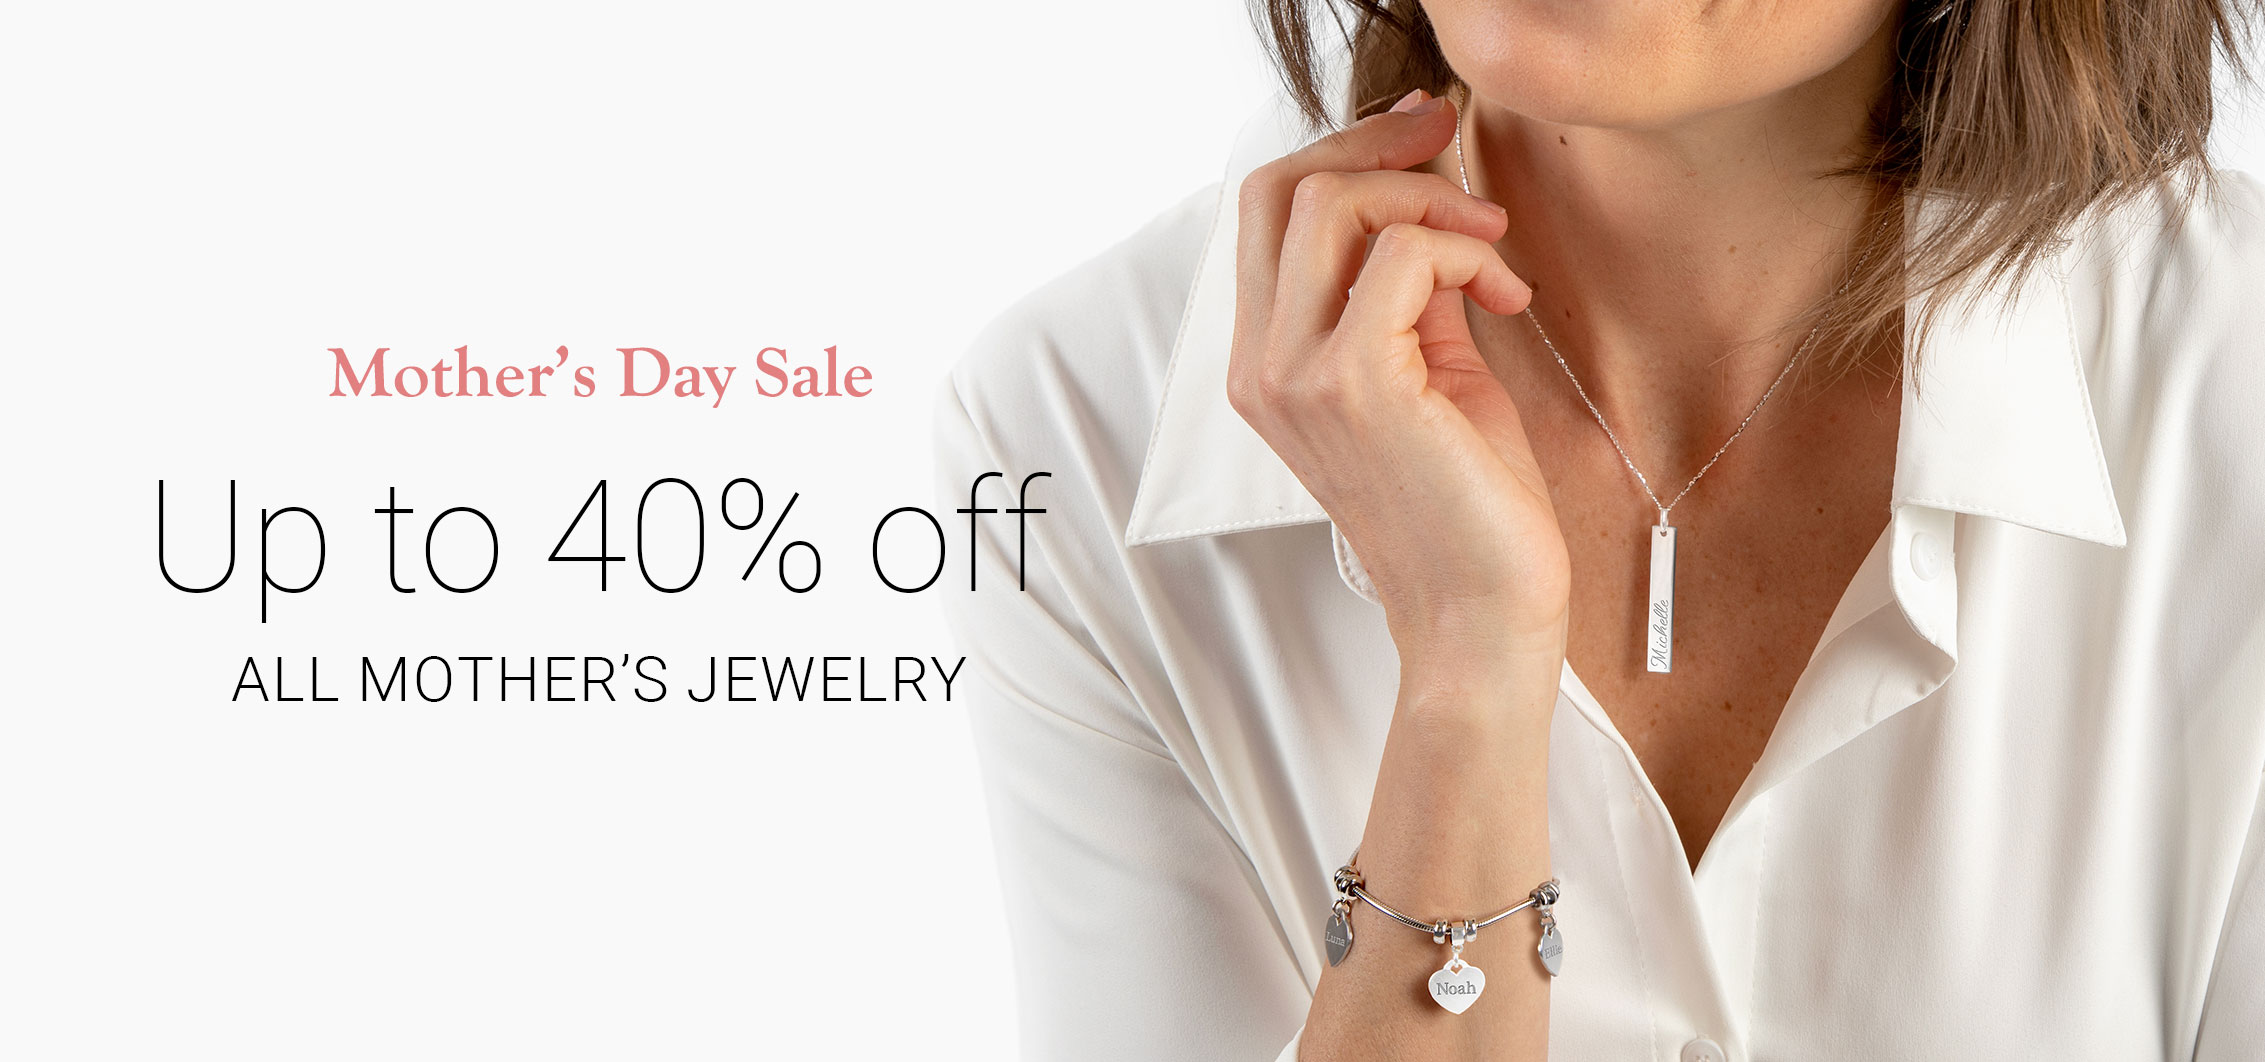 Sale on Mother's Jewelry Gifts